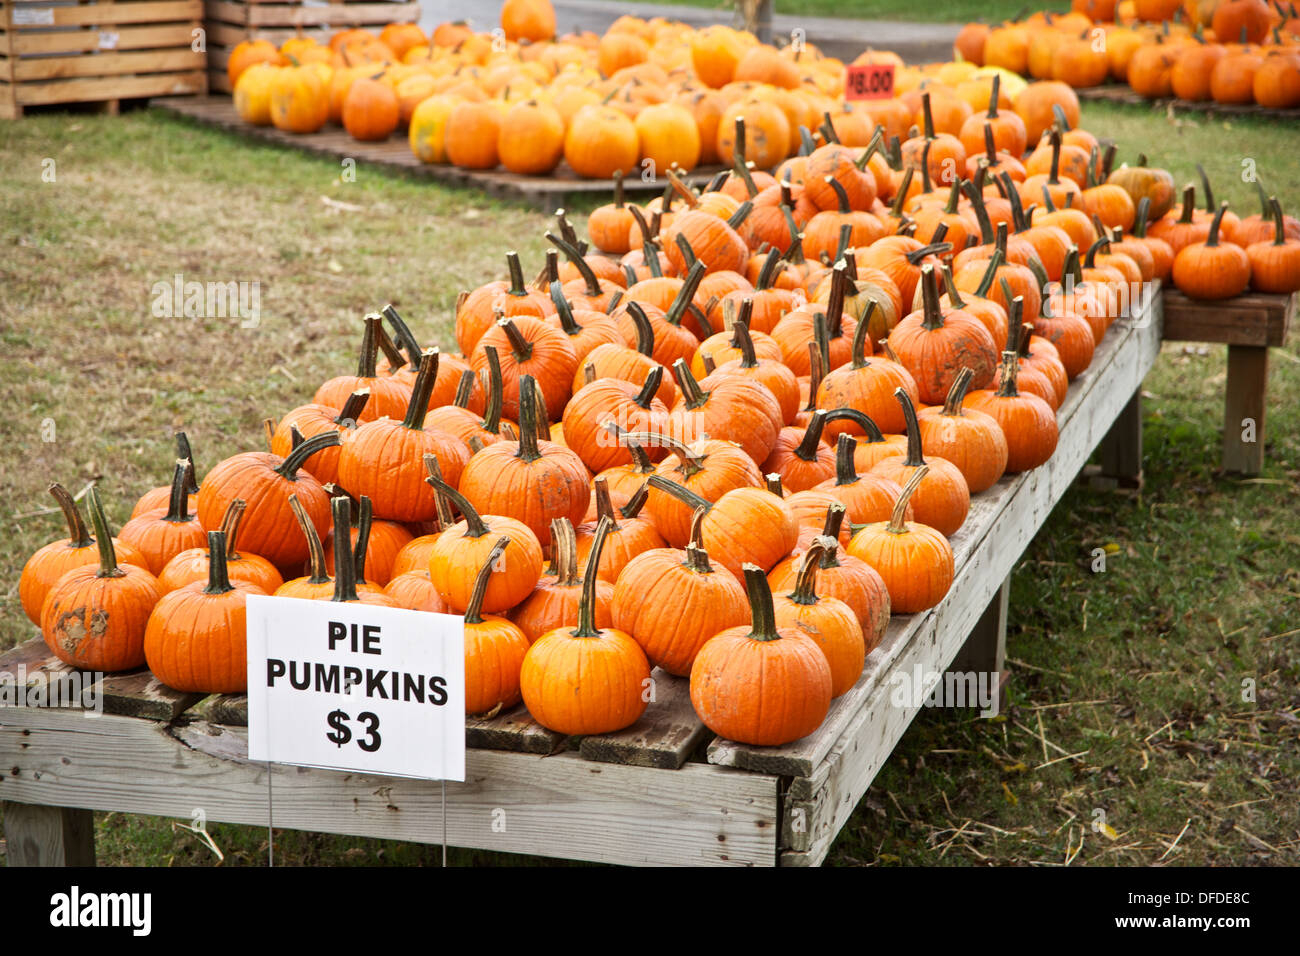 Multiple pumpkins on display for sail at a farmers market festival in the fall. Stock Photo